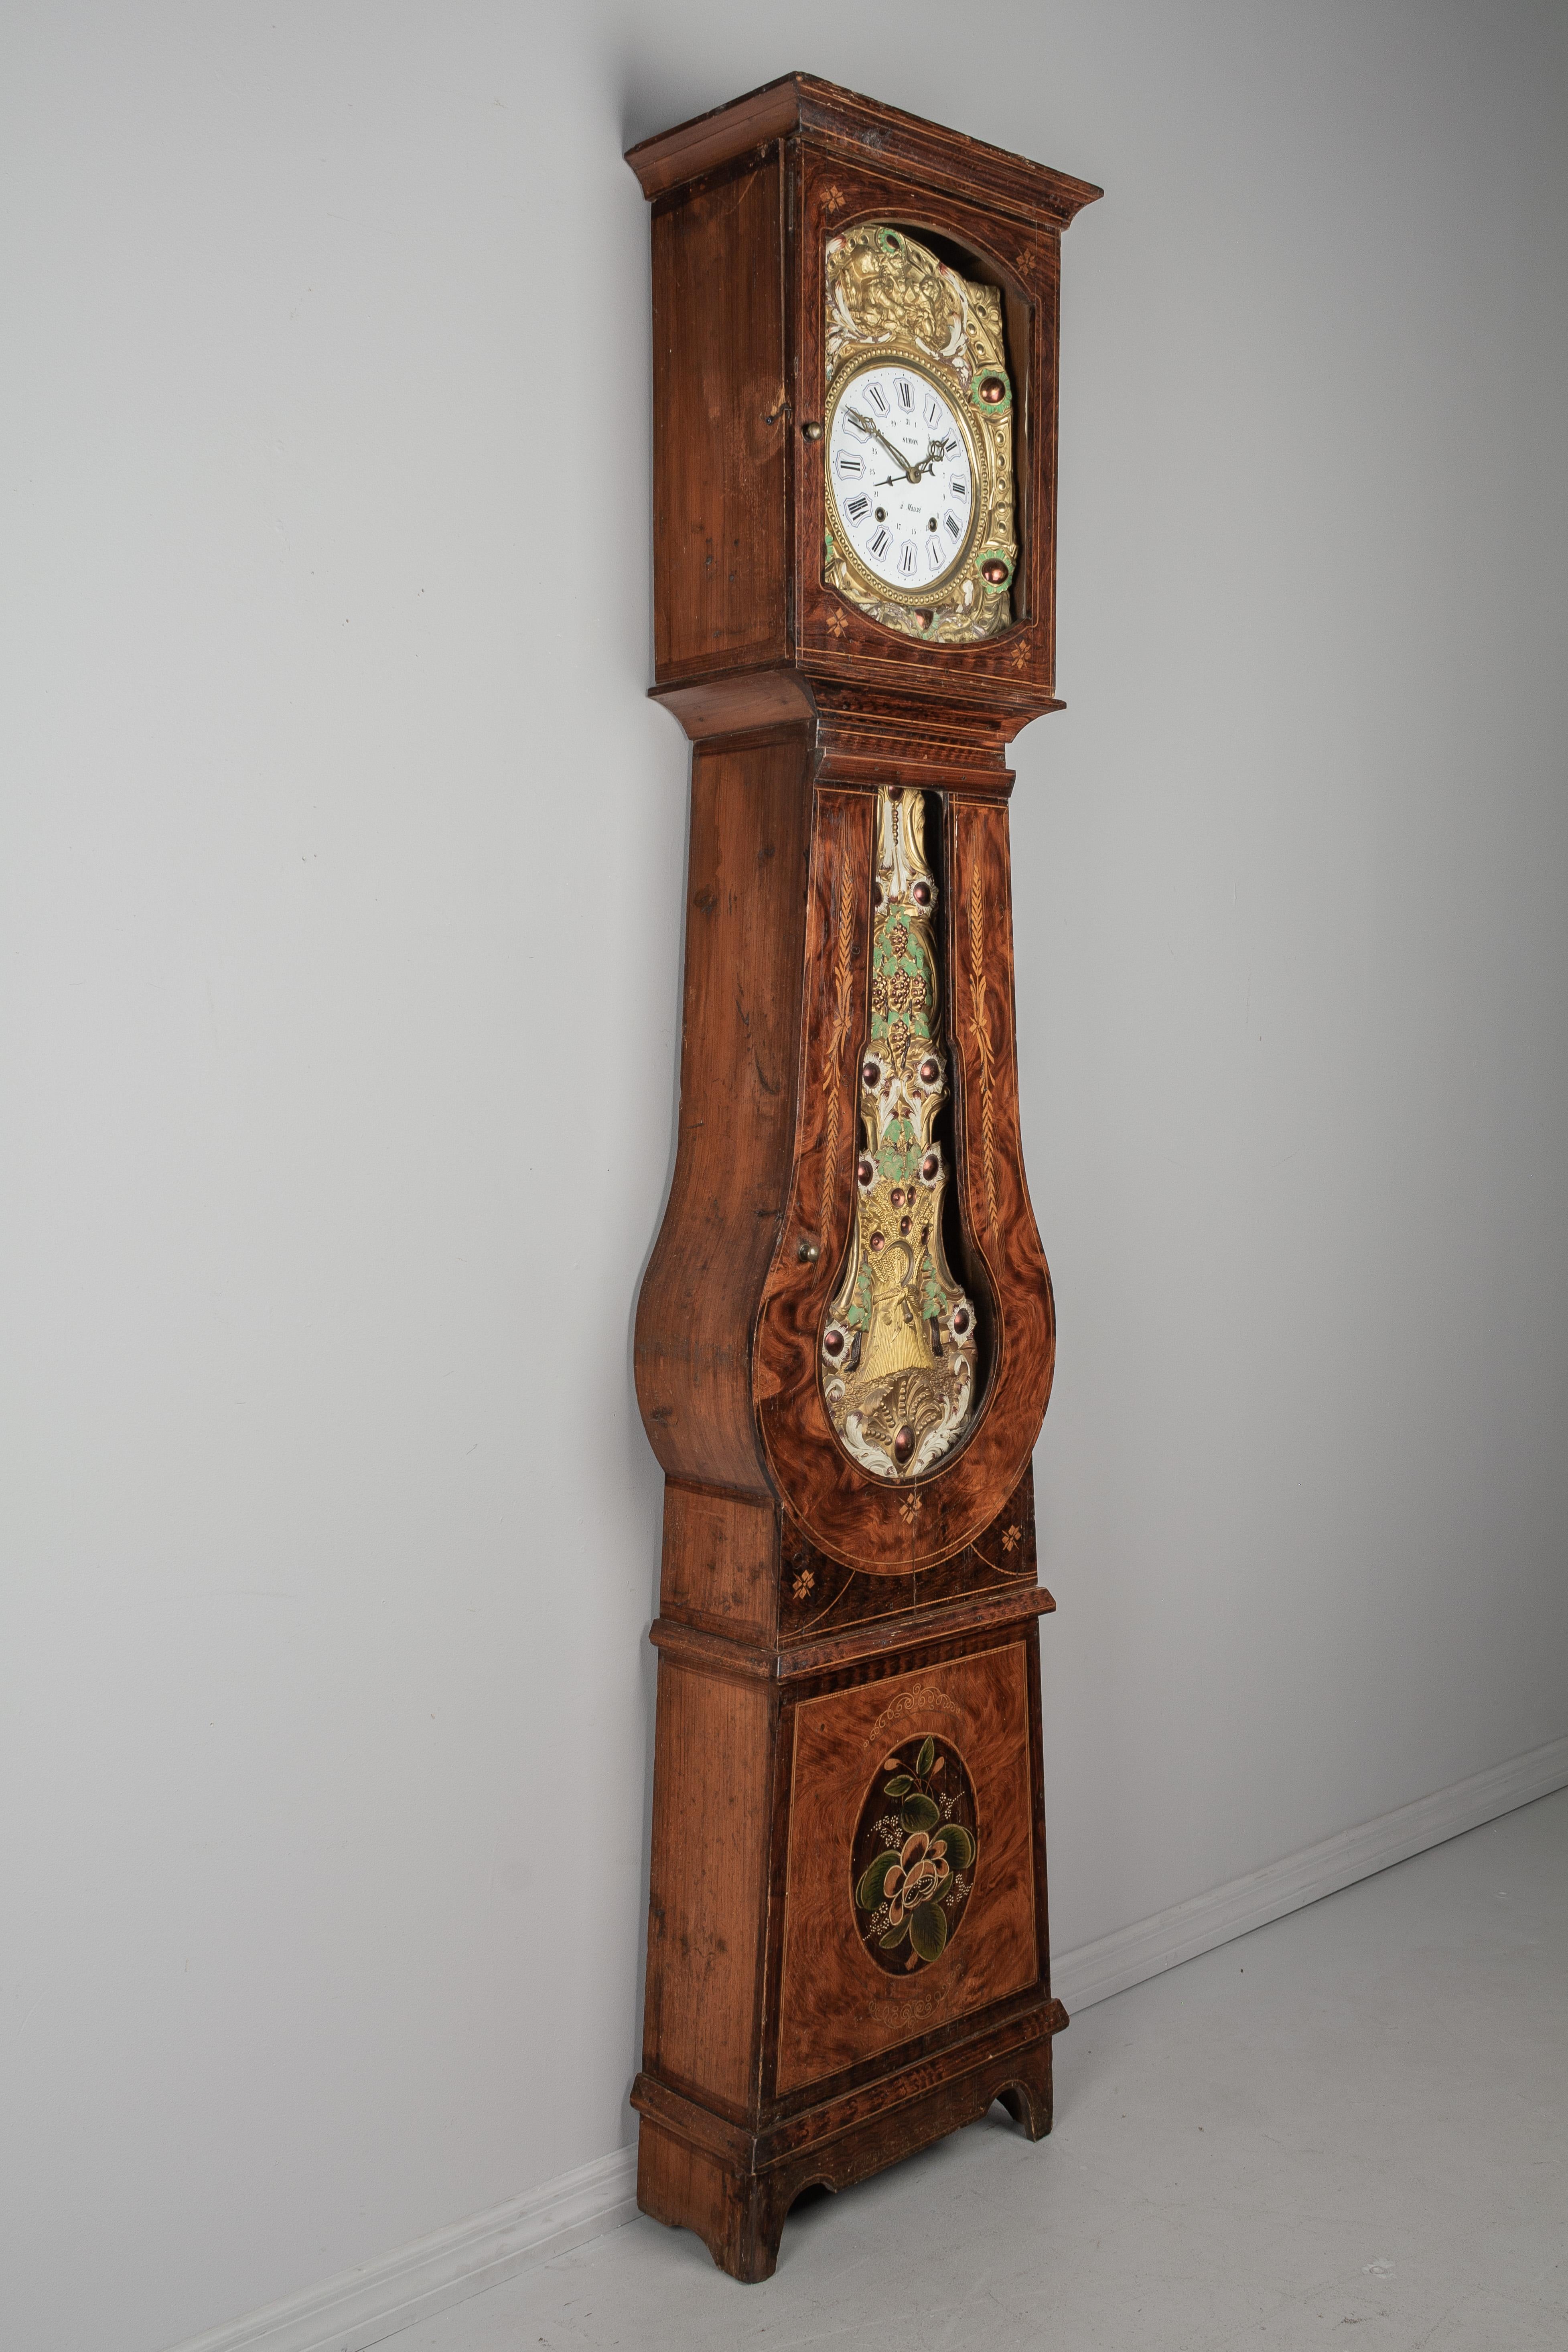 A 19th century country French comtoise, or grandfather clock, with polychrome painted pine case and embossed brass pendulum. Original seven day Morbier movement, professionally cleaned and in working order, having an enamel face signed by the